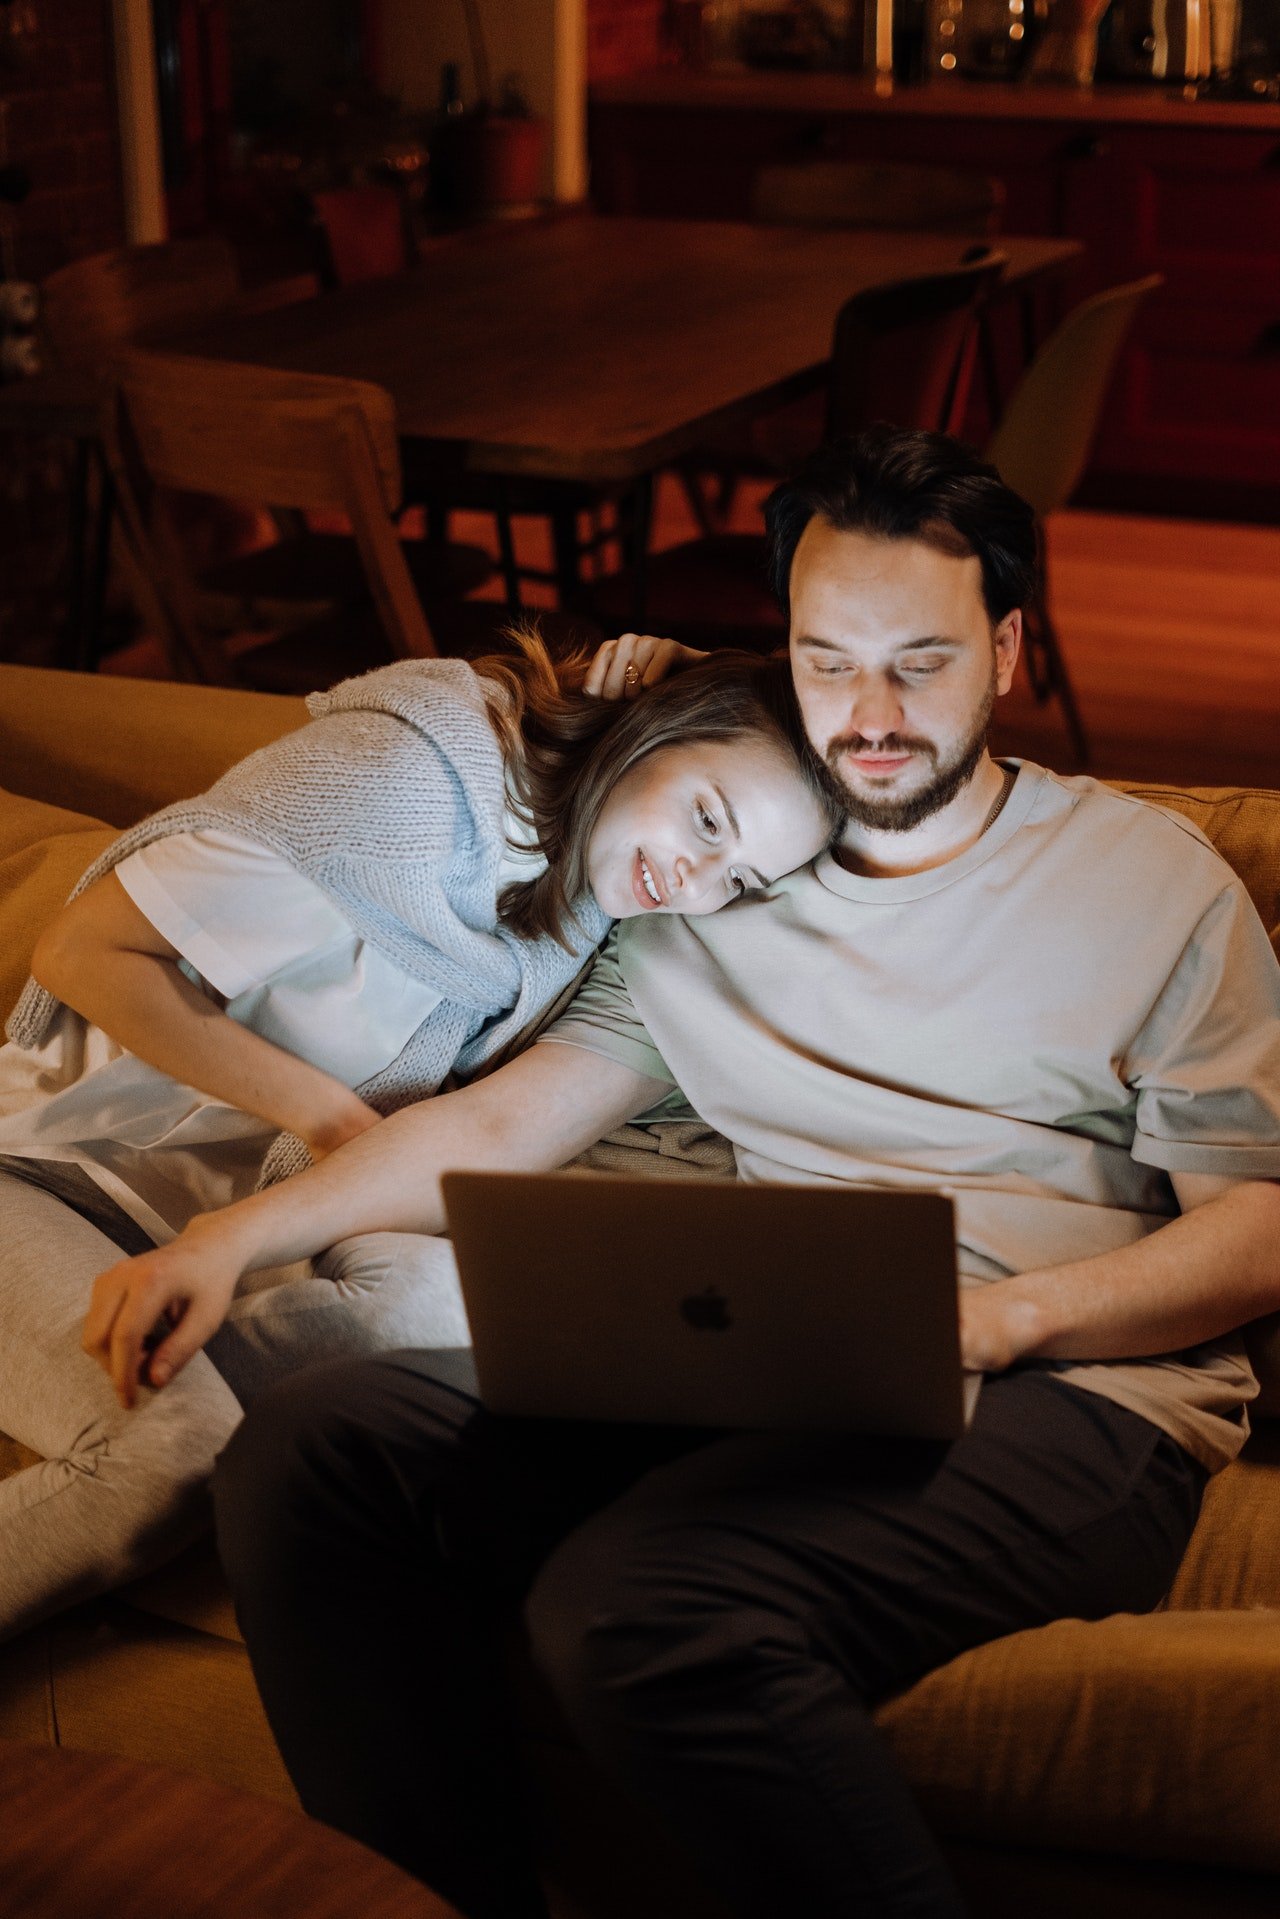 Jeffrey and Nancy were too excited to sleep after their engagement.  | Source: Pexels